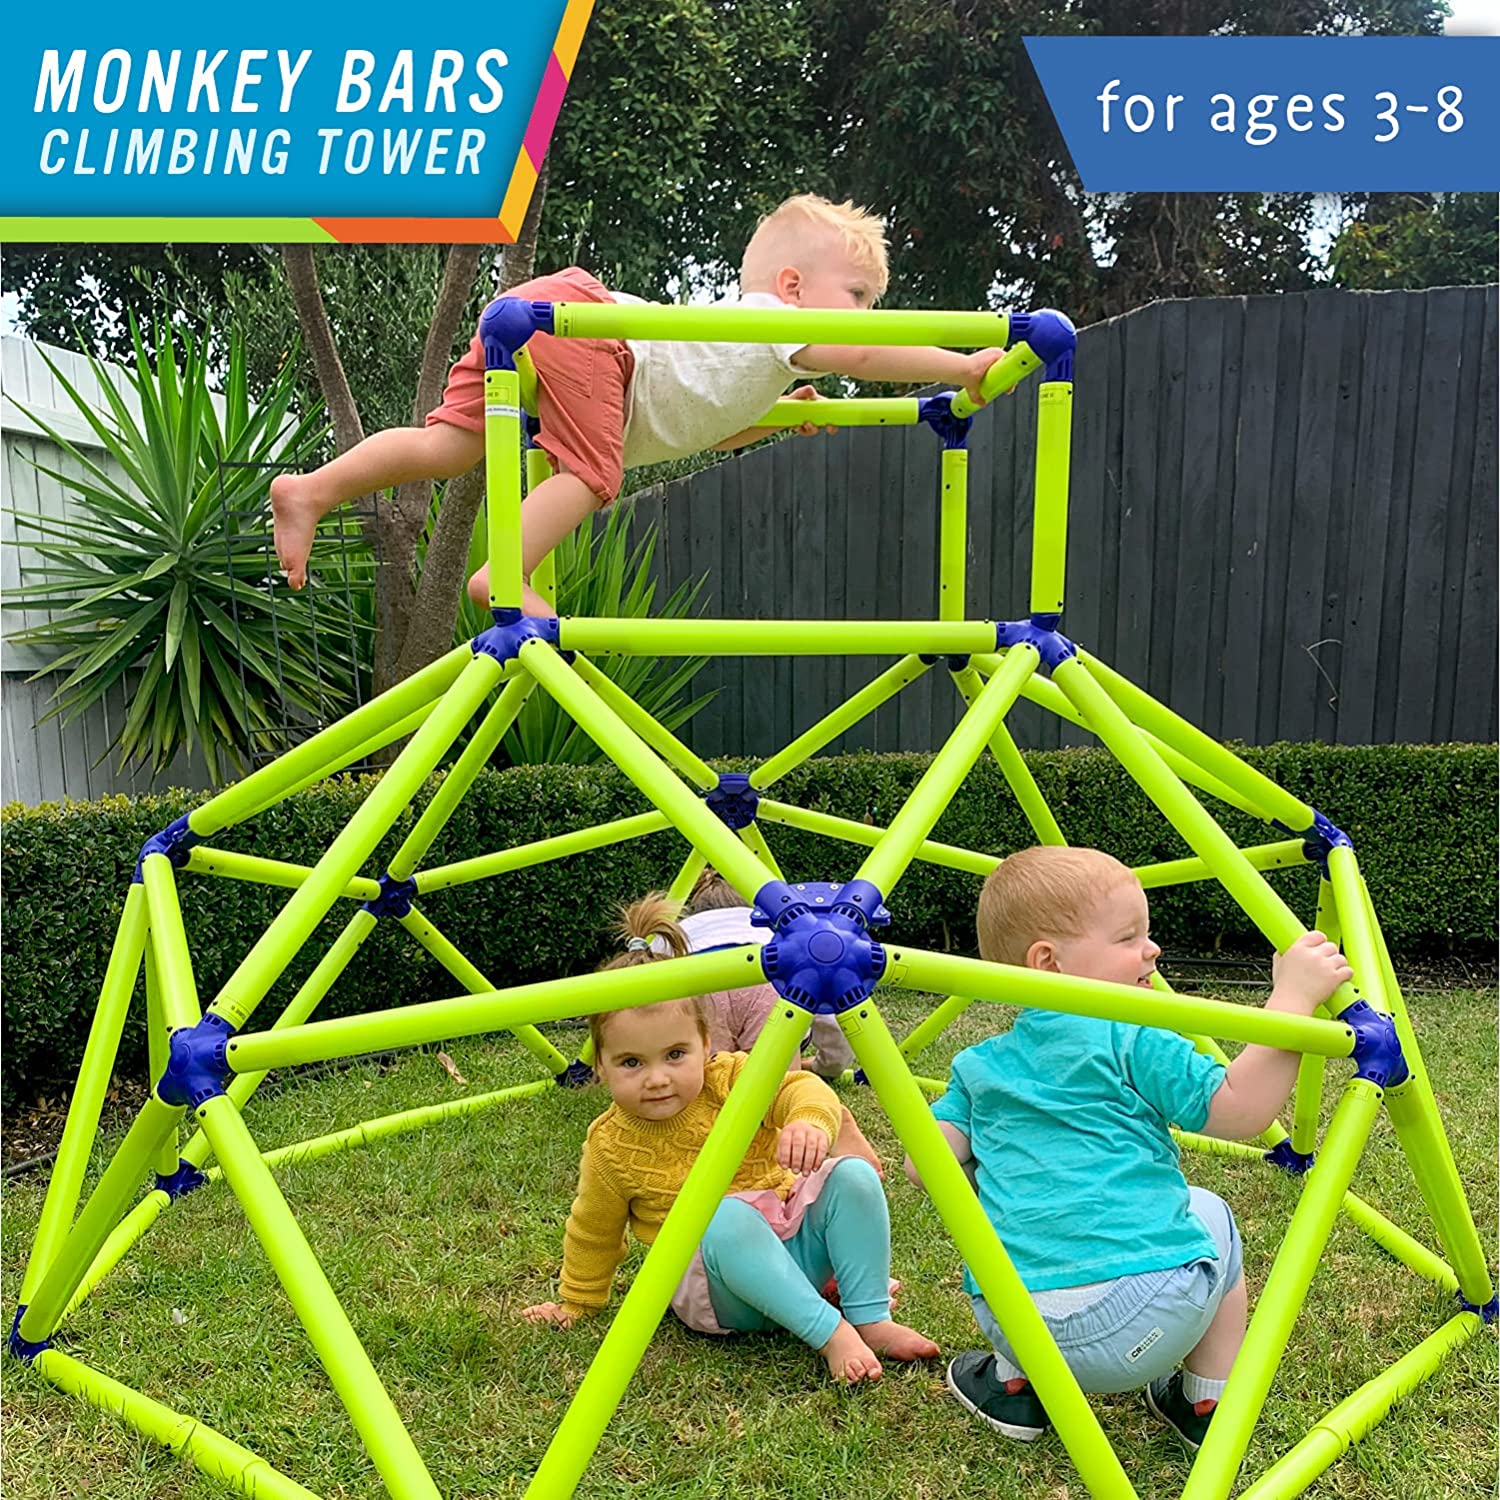 Eezy Peezy, Eezy Peezy Monkey Bars Climbing Tower Playset - Easy Assembly - Indoor and Outdoor Use